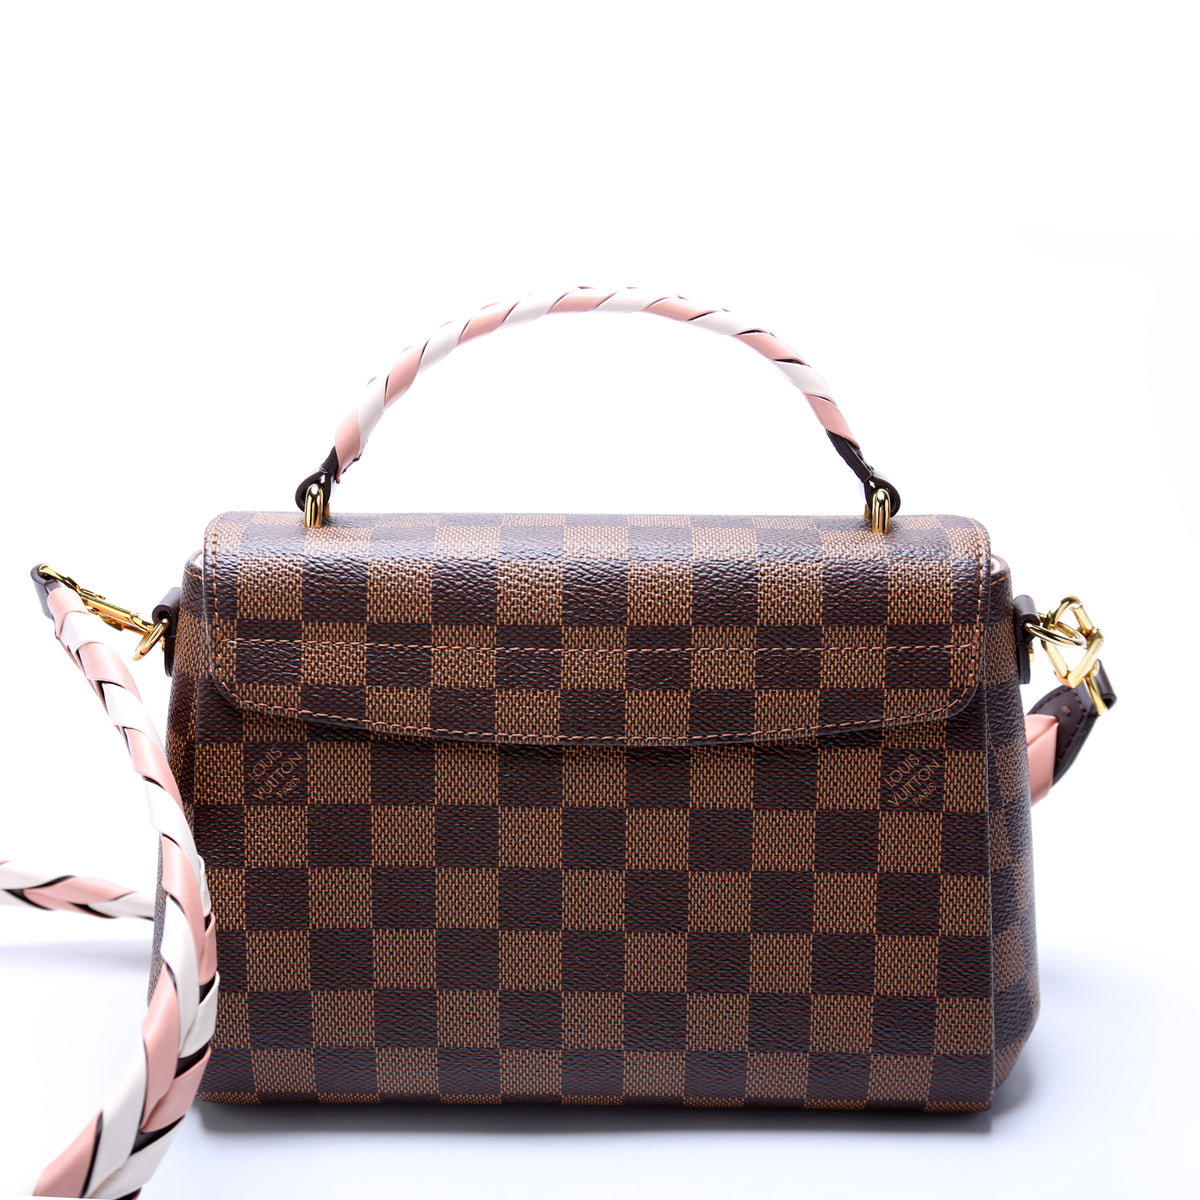 LOUIS VUITTON CROISETTE FIRST IMPRESSIONS + 4 STYLING IDEAS 